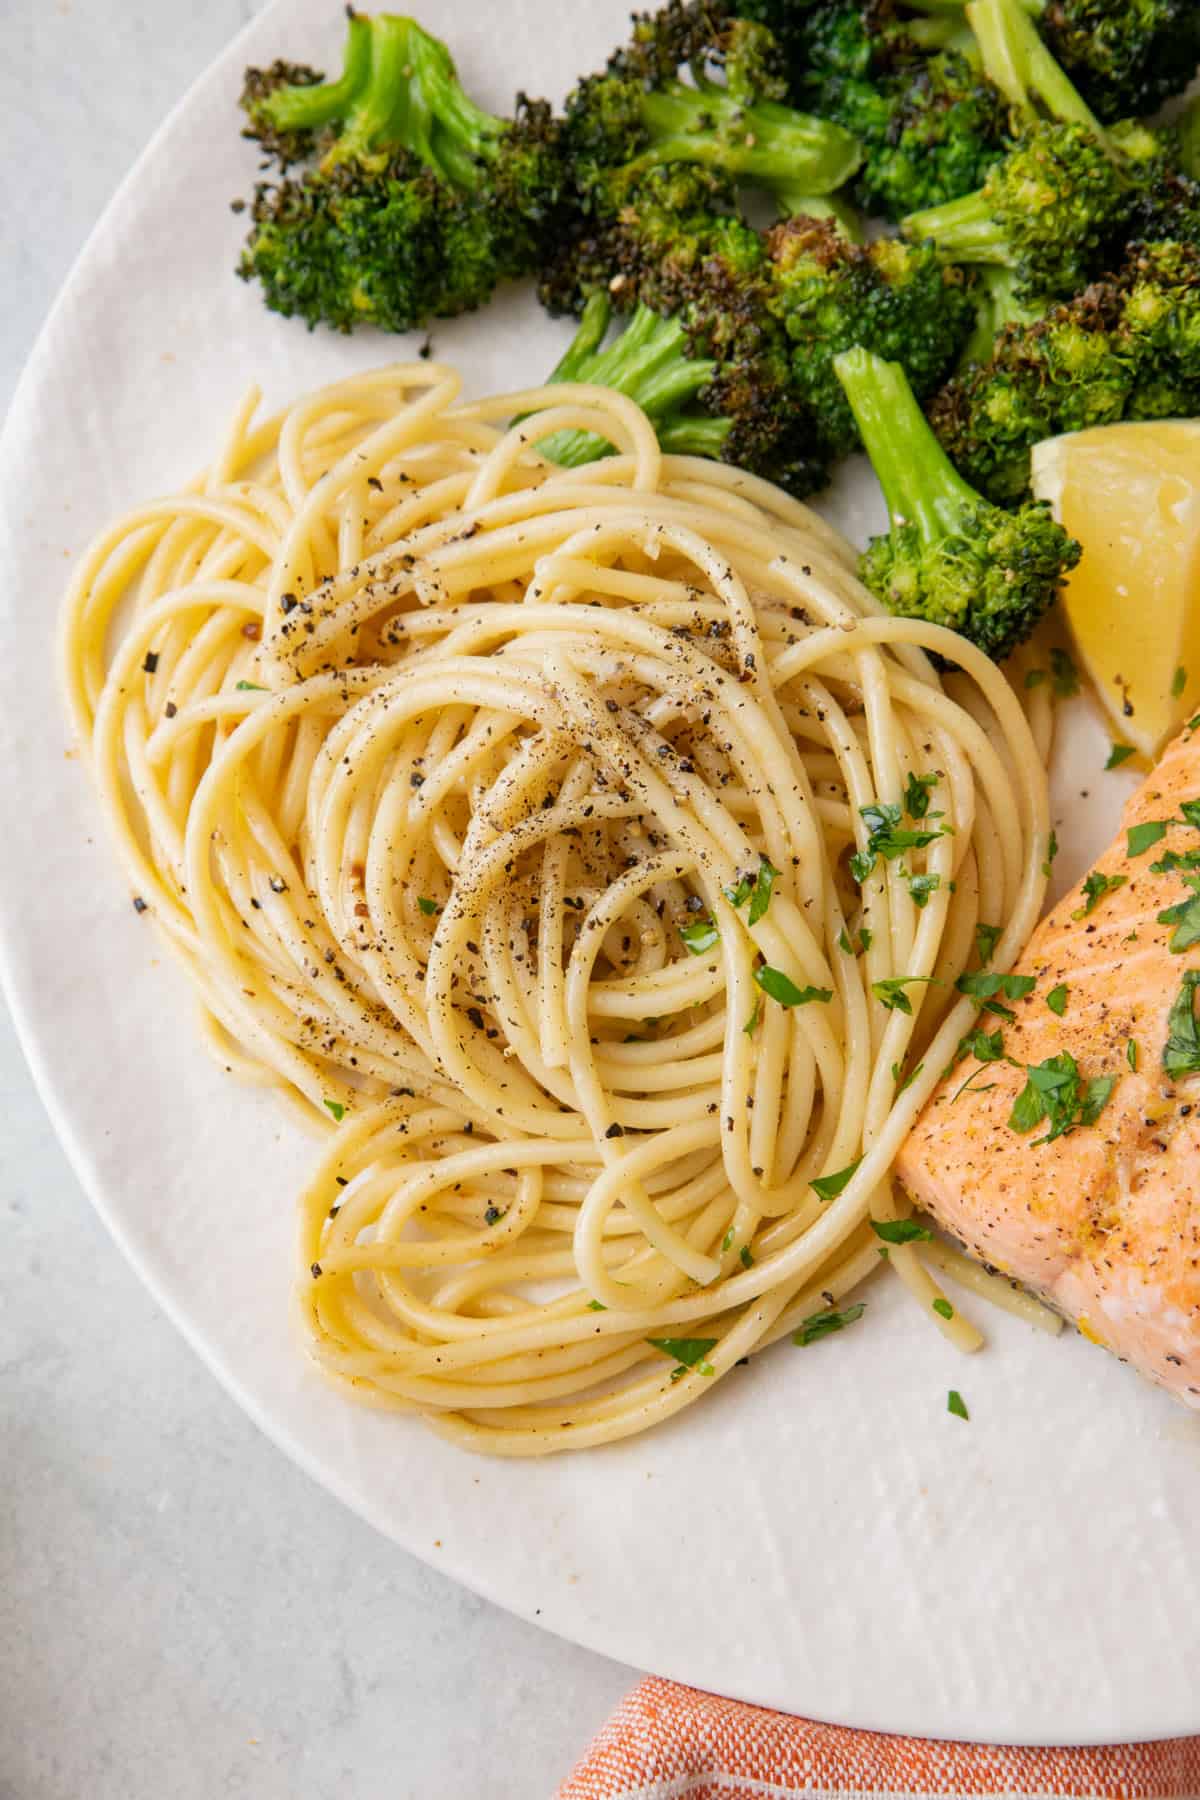 Cacio e Pepe on a plate with broccoli and salmon, garnished with fresh cracked pepper and chopped parsley.